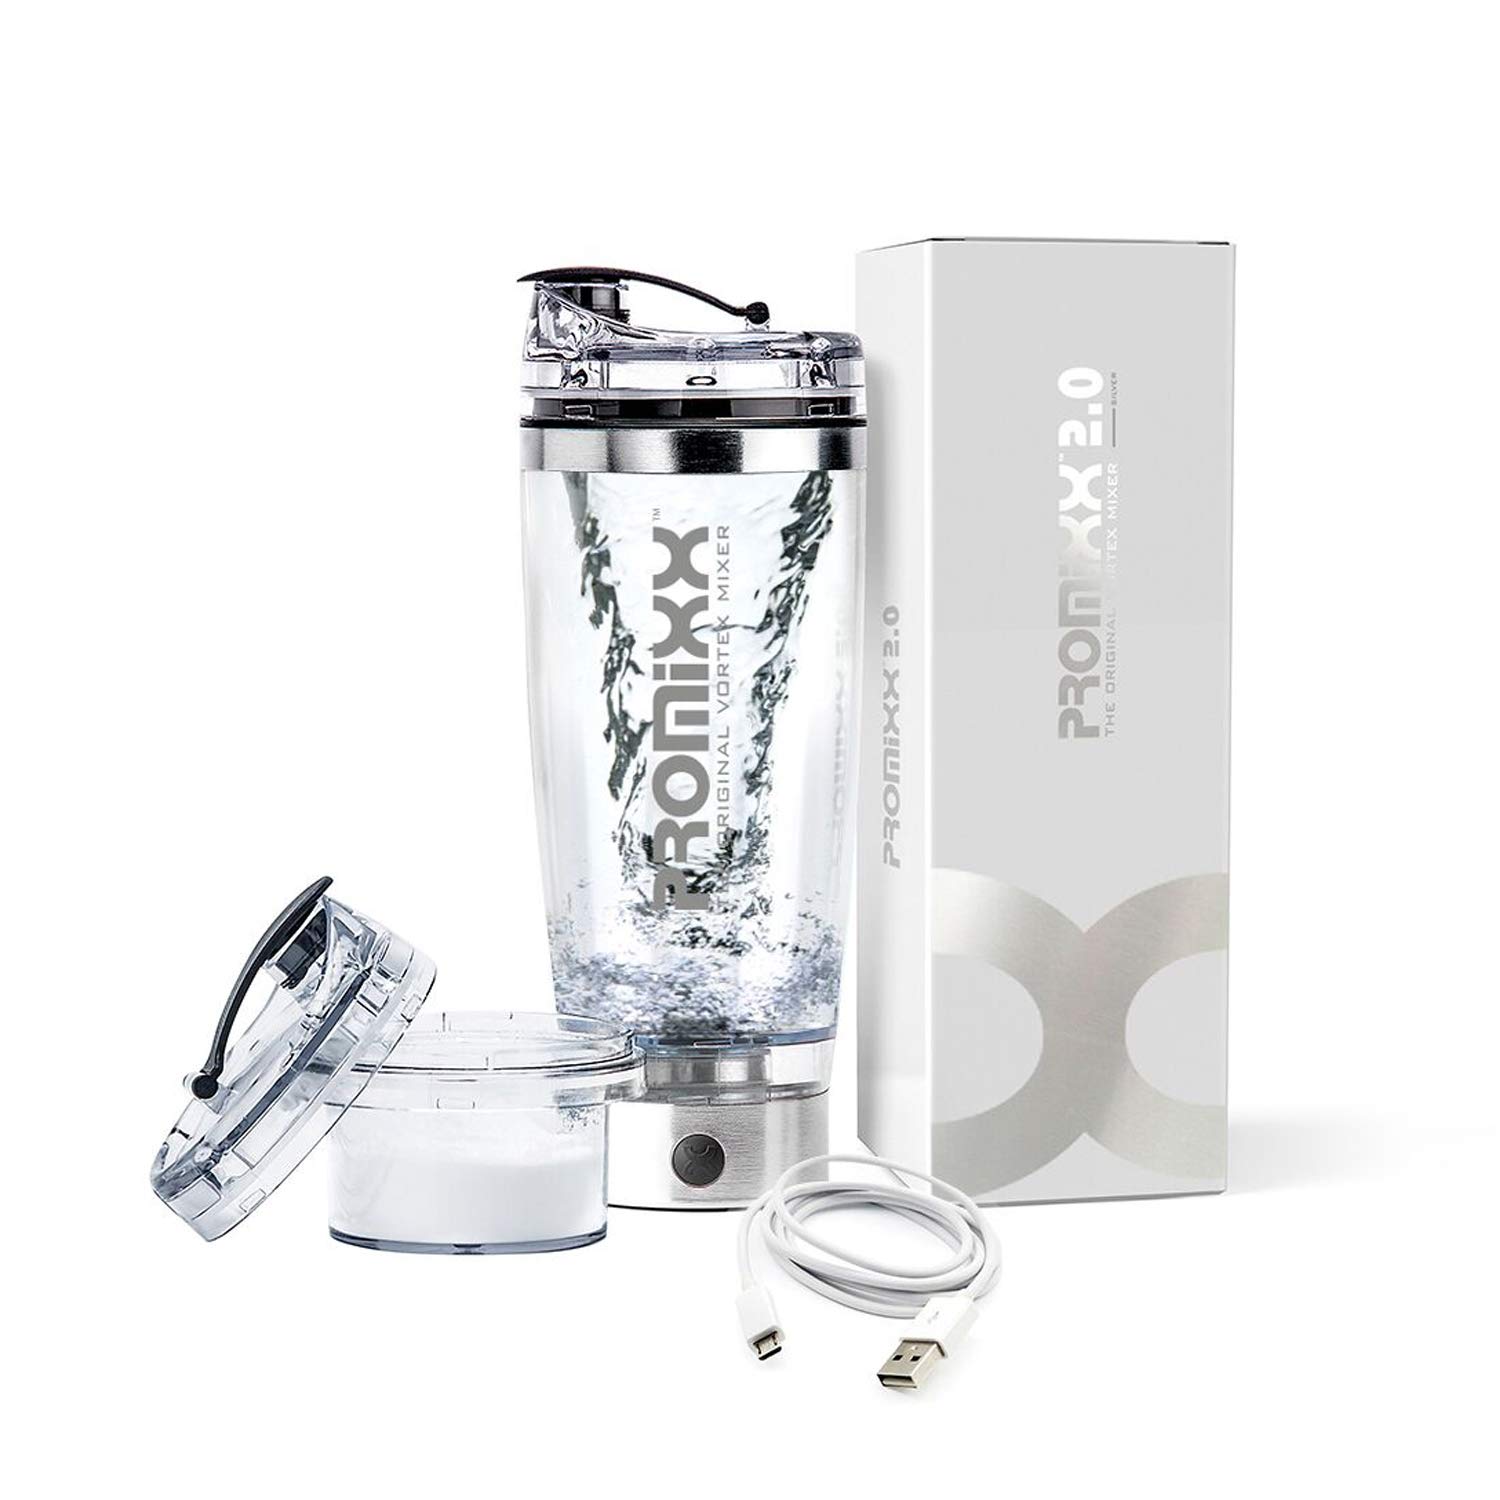 Promixx 2.0 Electric Protein Shaker